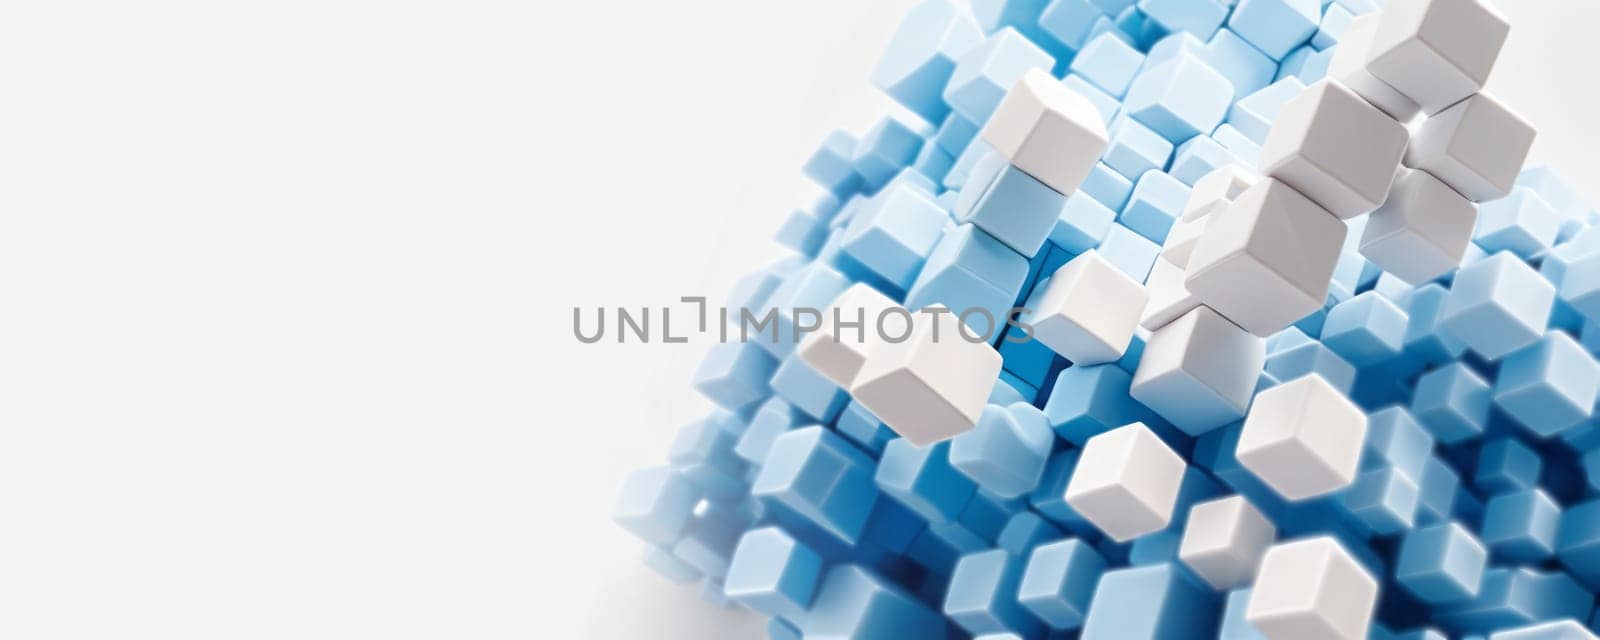 Blue and White Cubes Forming 3D Structure by nkotlyar